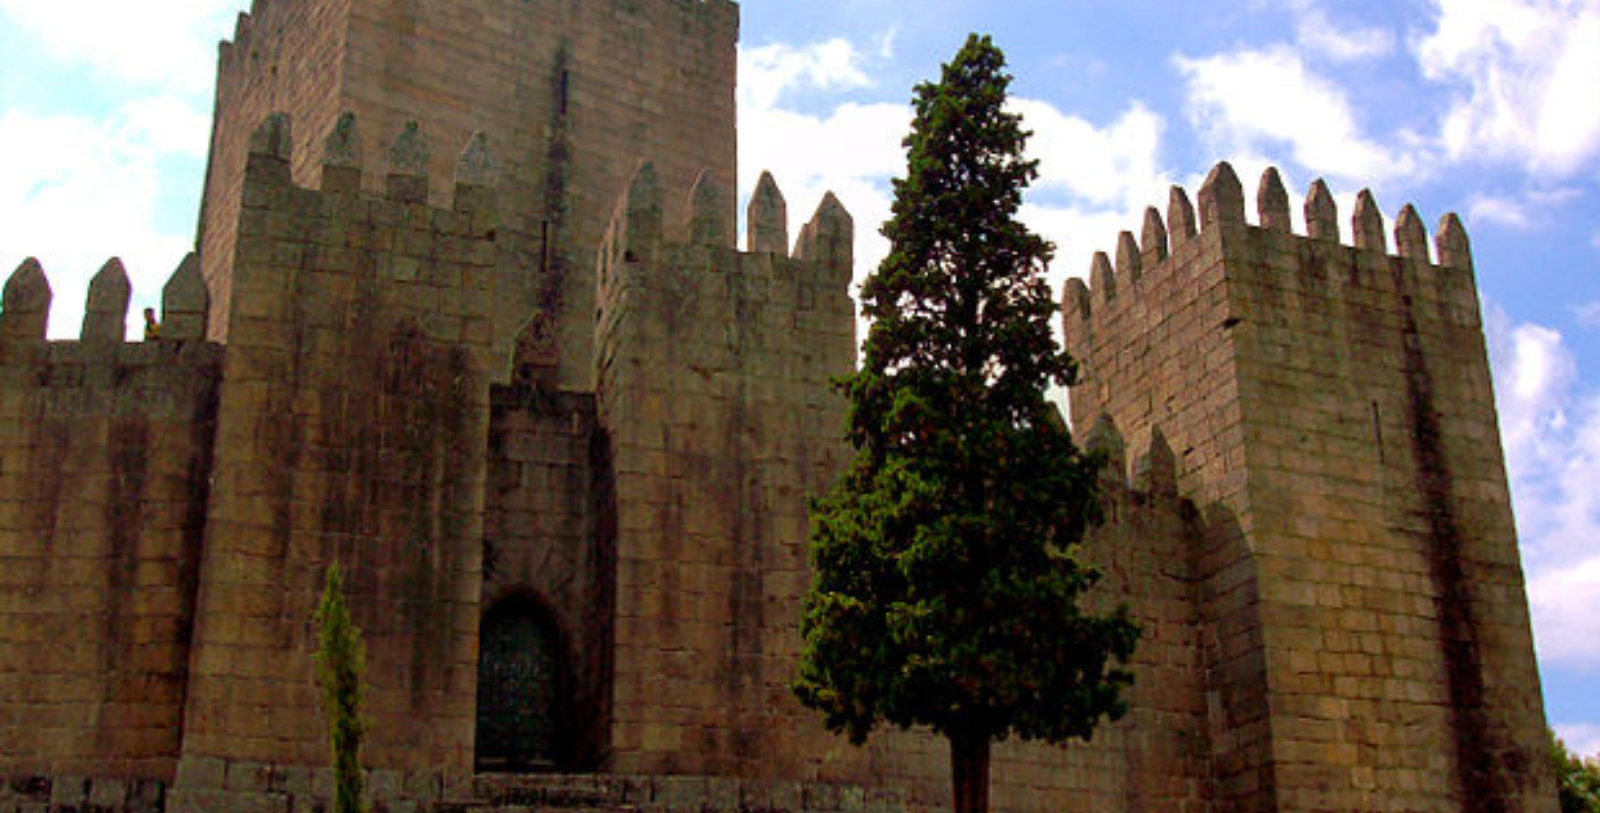 Experience the ancient Guimaraes Castle that has been standing since the 1000s.